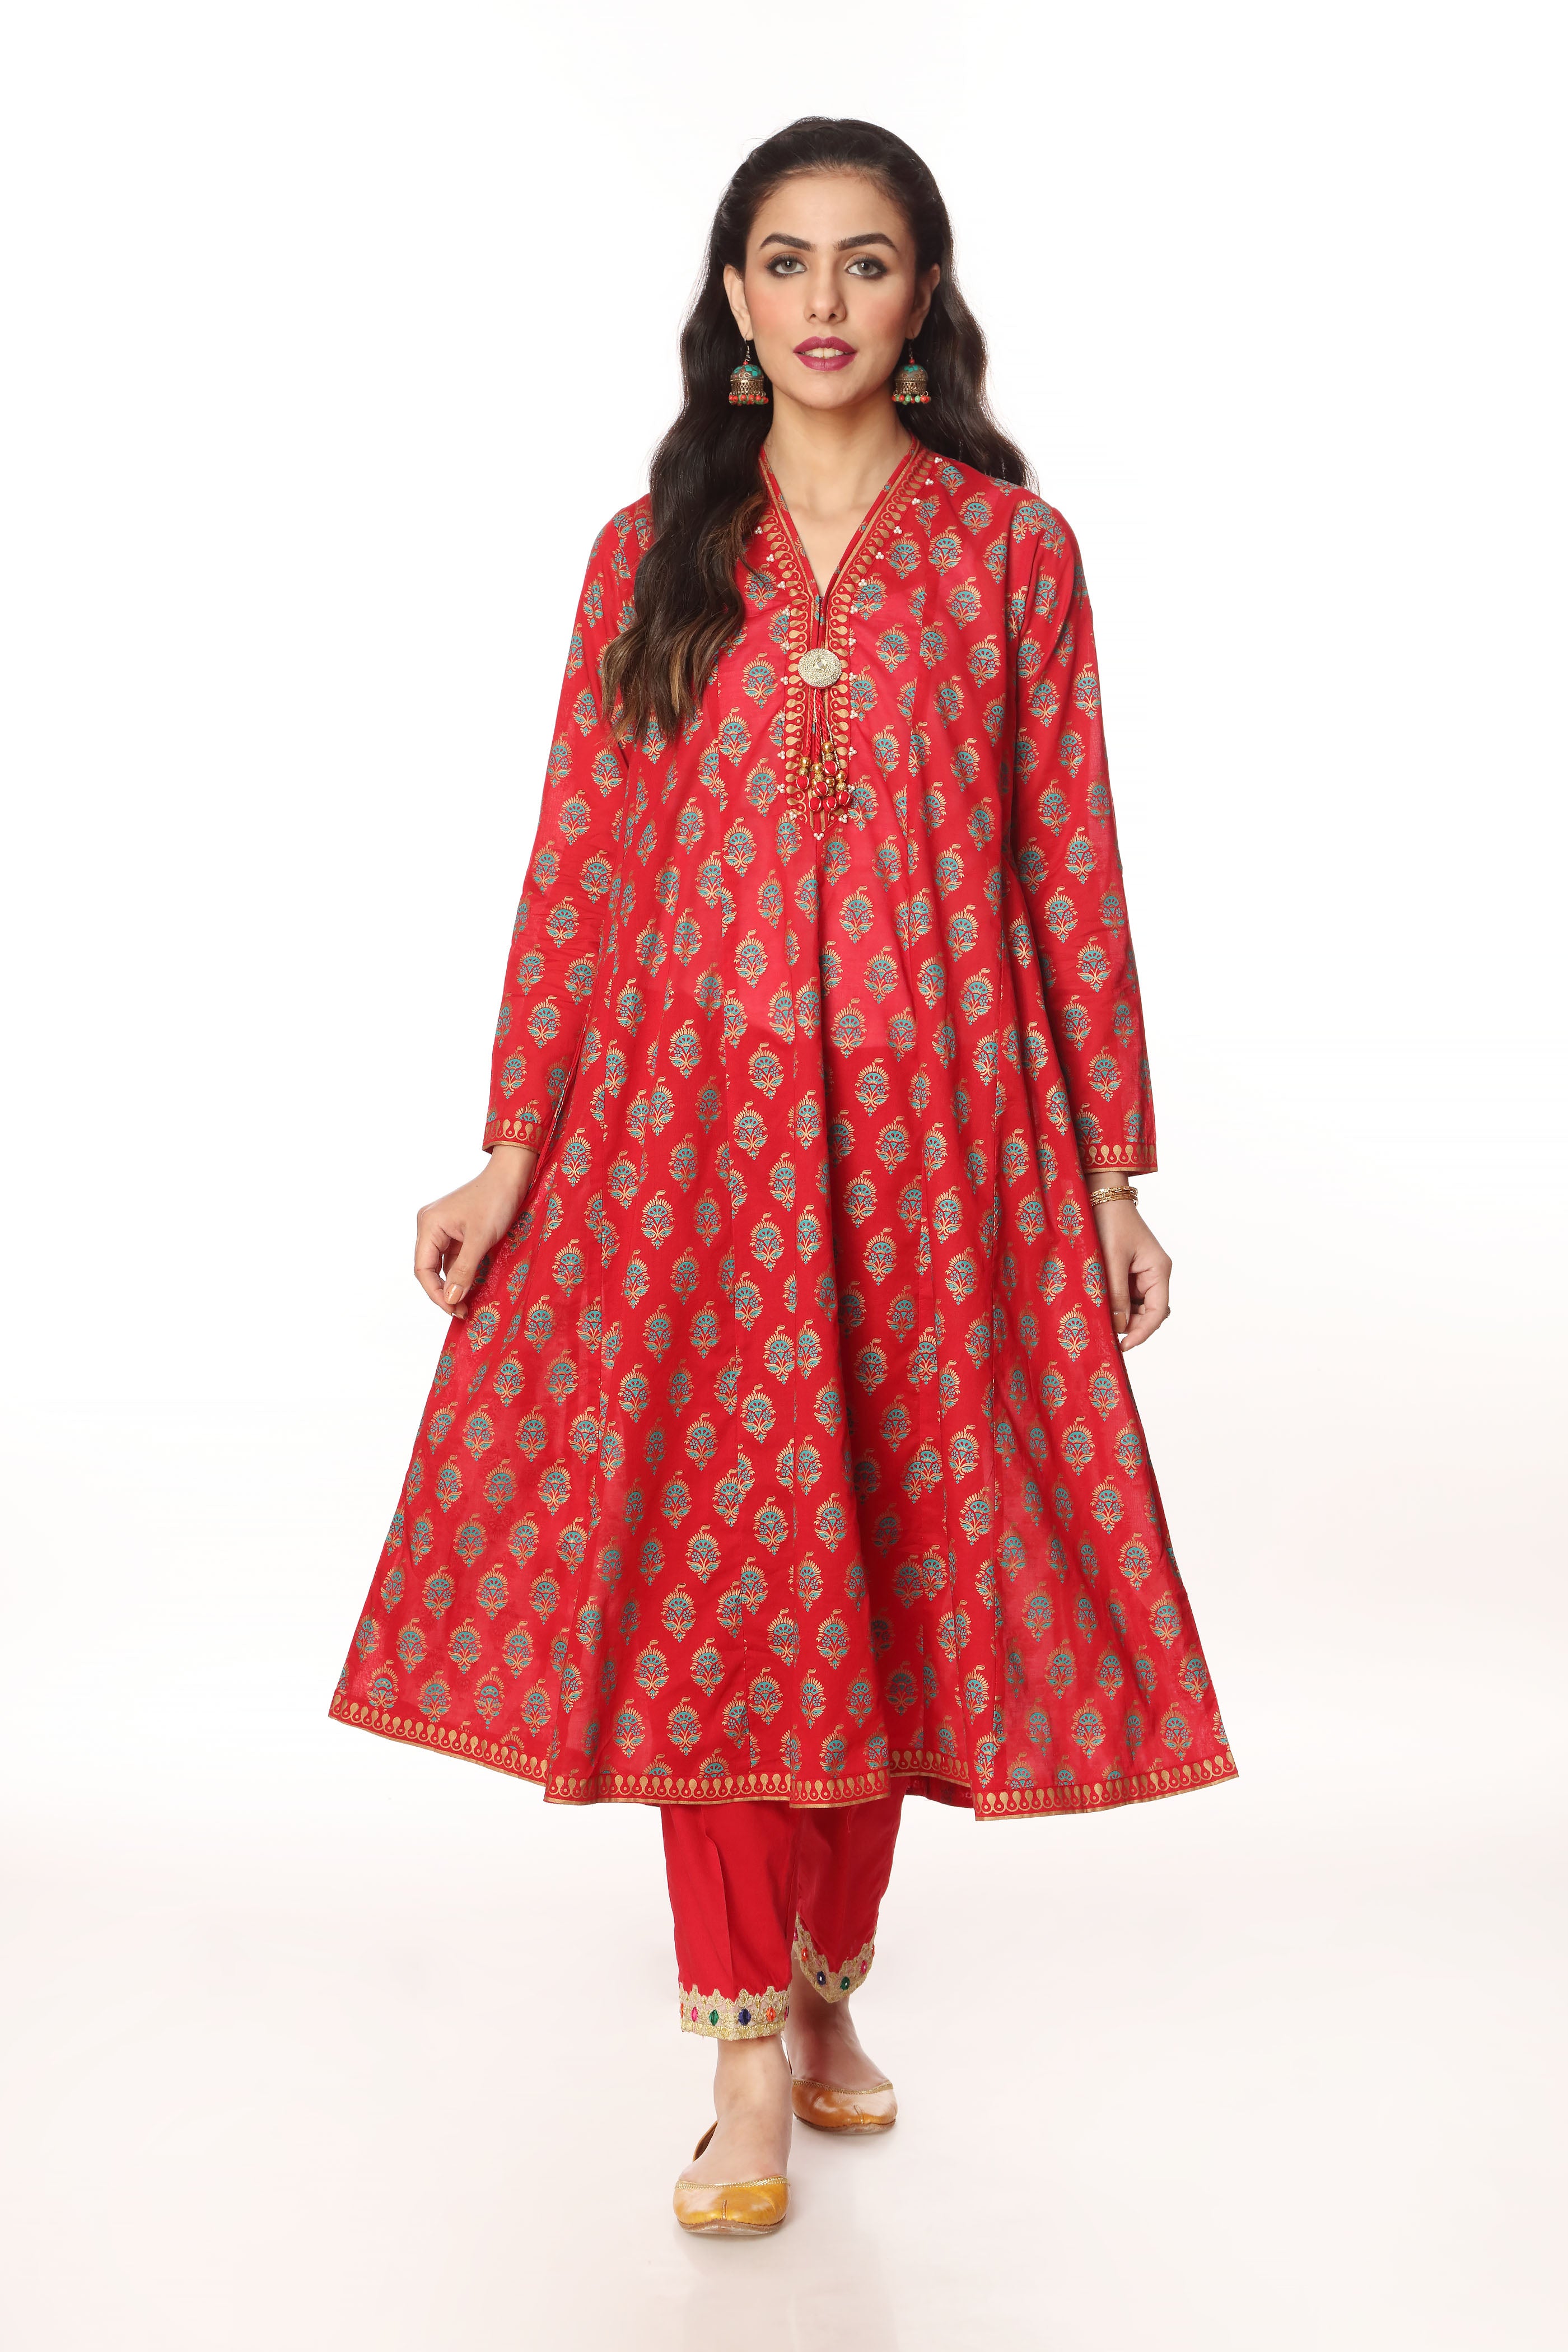 Peacock Frock in Red coloured Printed Lawn fabric